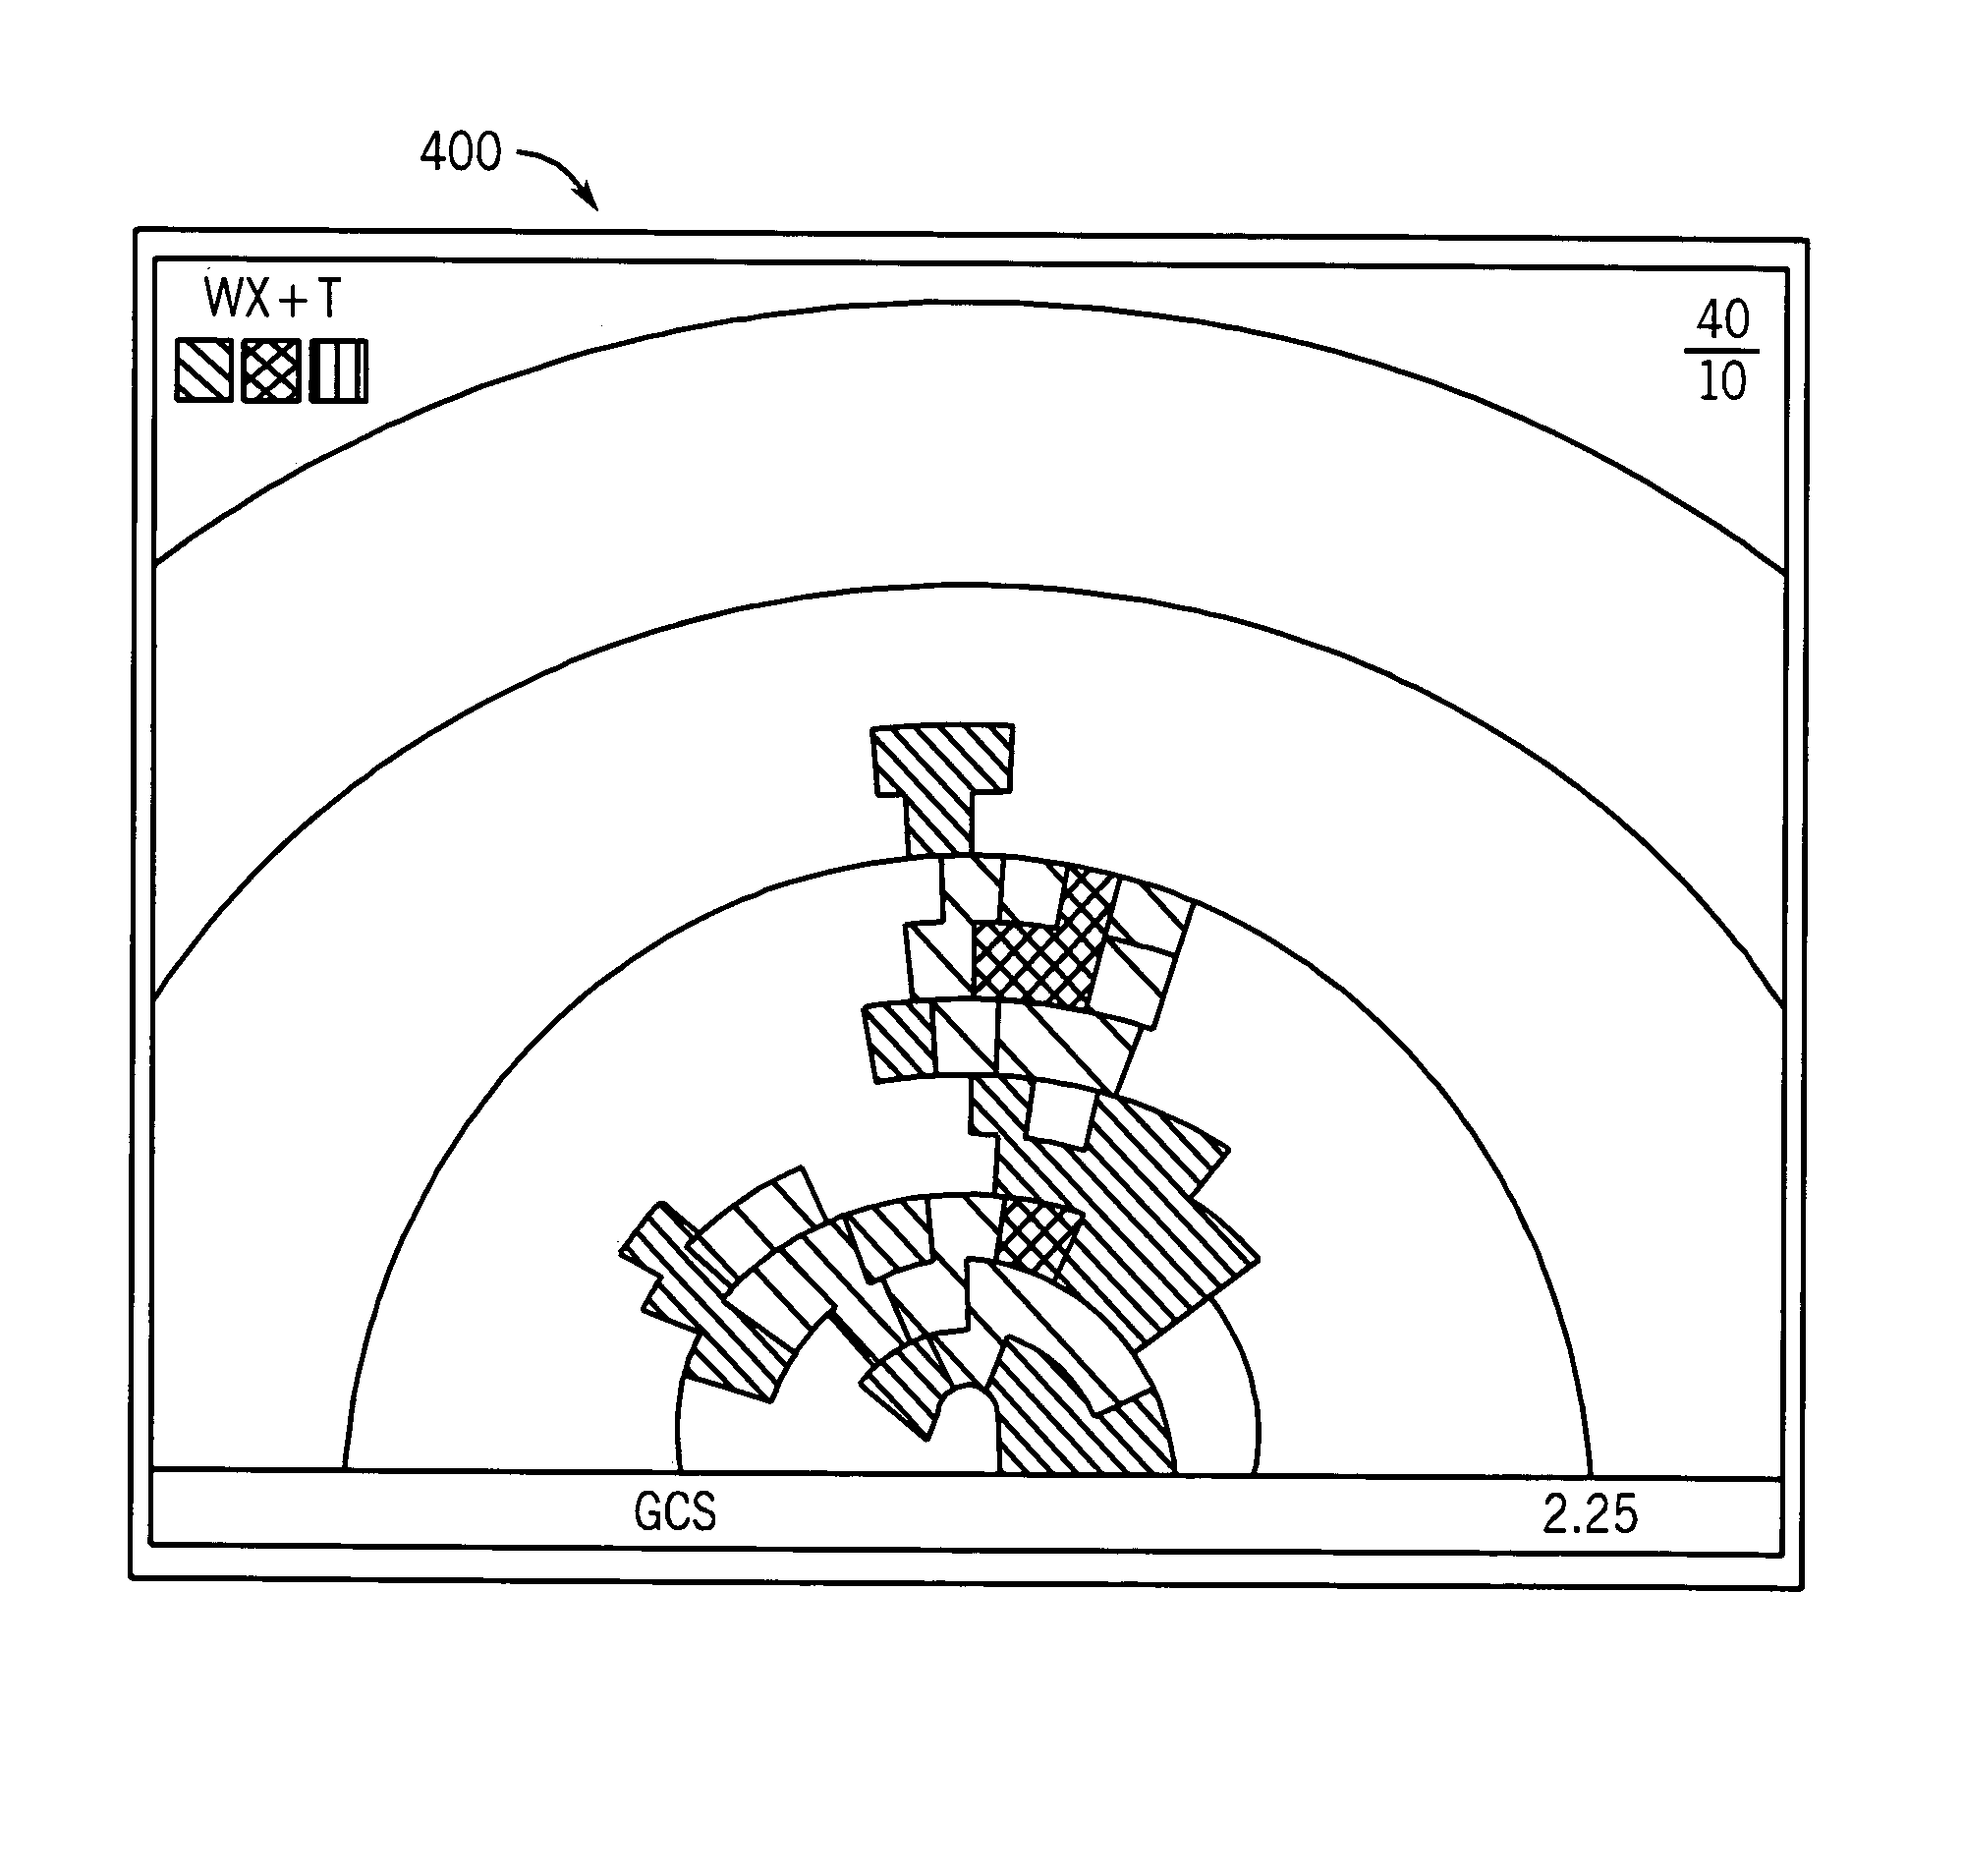 Data compression system and method for a weather radar system